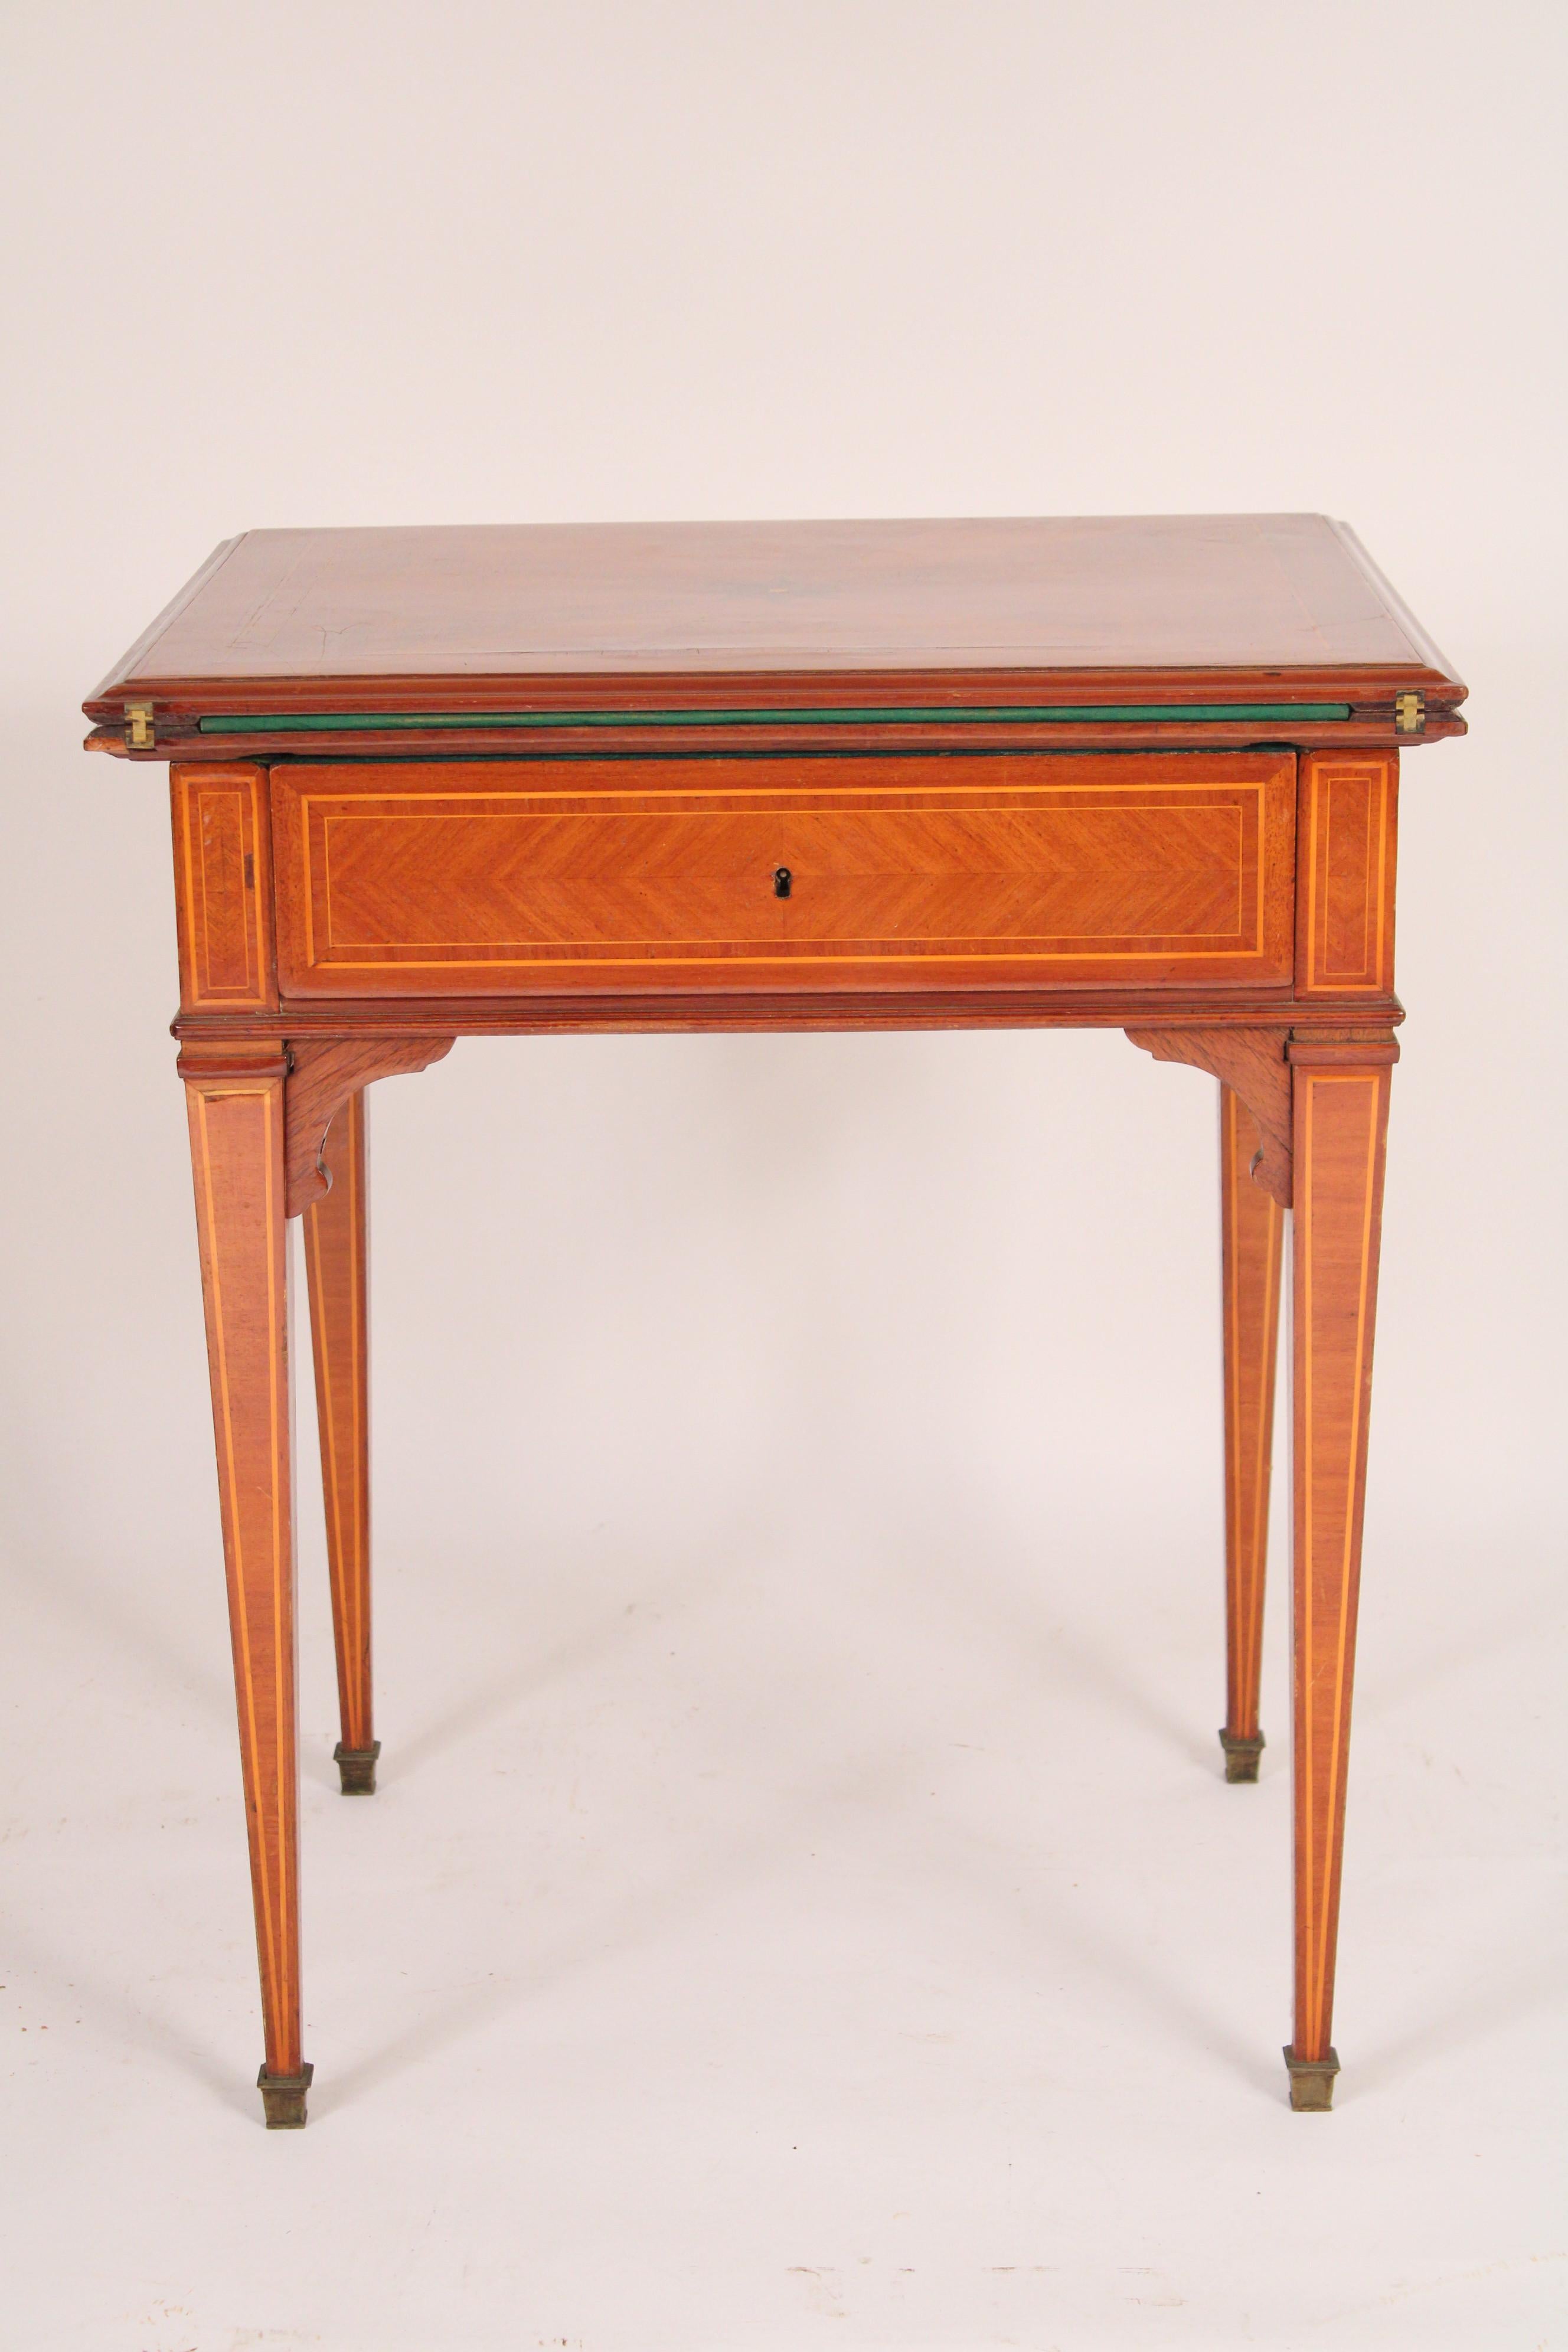 Louis XVI style tulip wood, birch and king wood fold over games table, circa 1930's. The top with a central star inlay, aprons with tulip wood panels framed with birch string inlay supported on square tapered legs ending in brass sabots. The playing